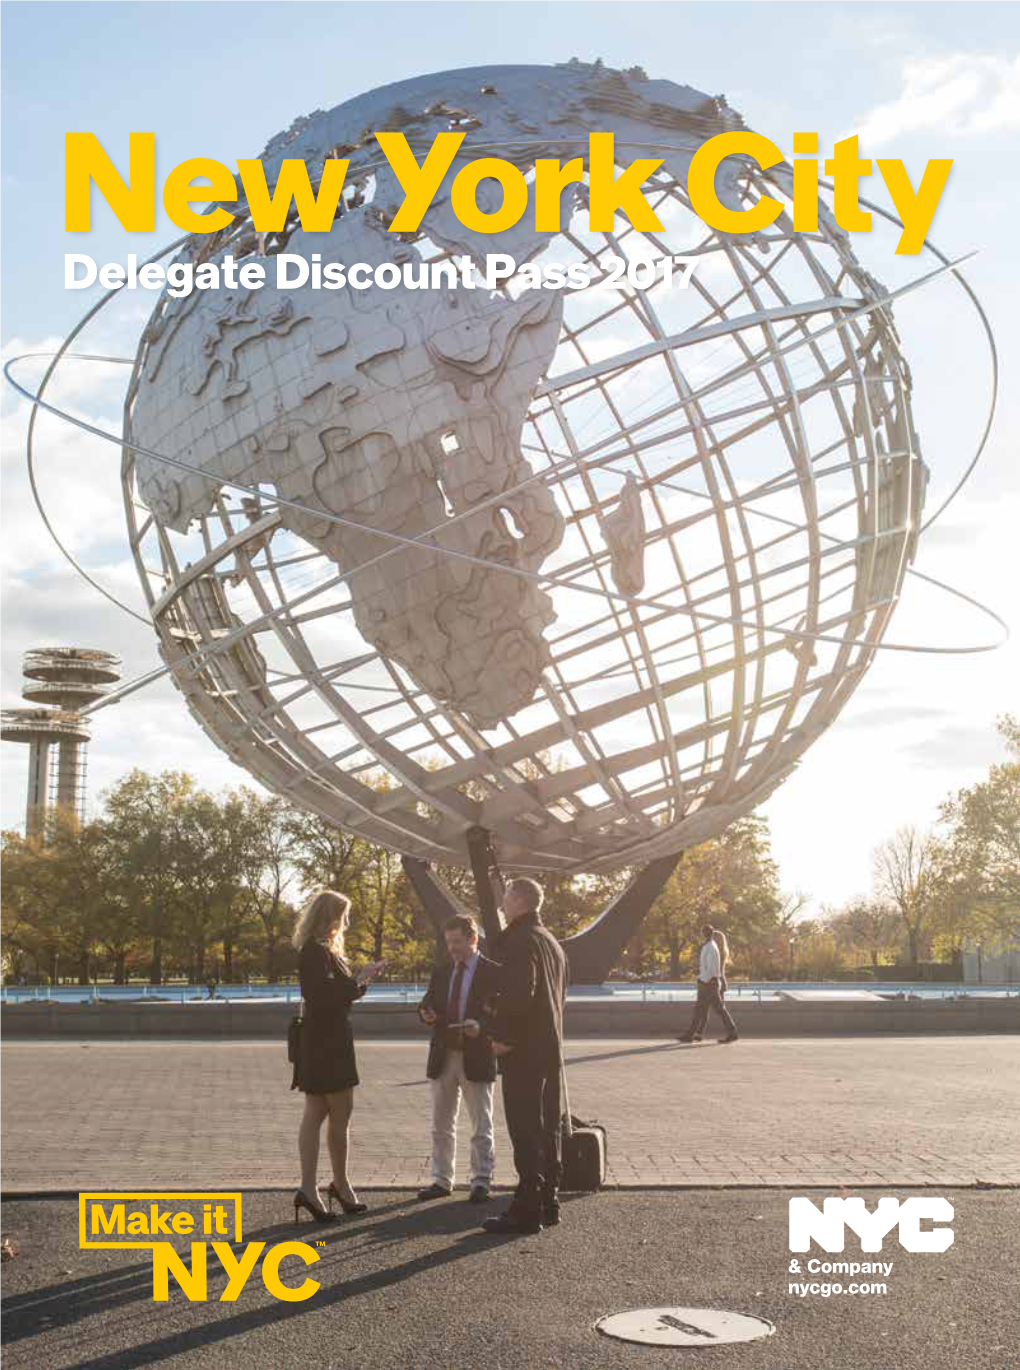 Delegate Discount Pass 2017 Welcome to New York City